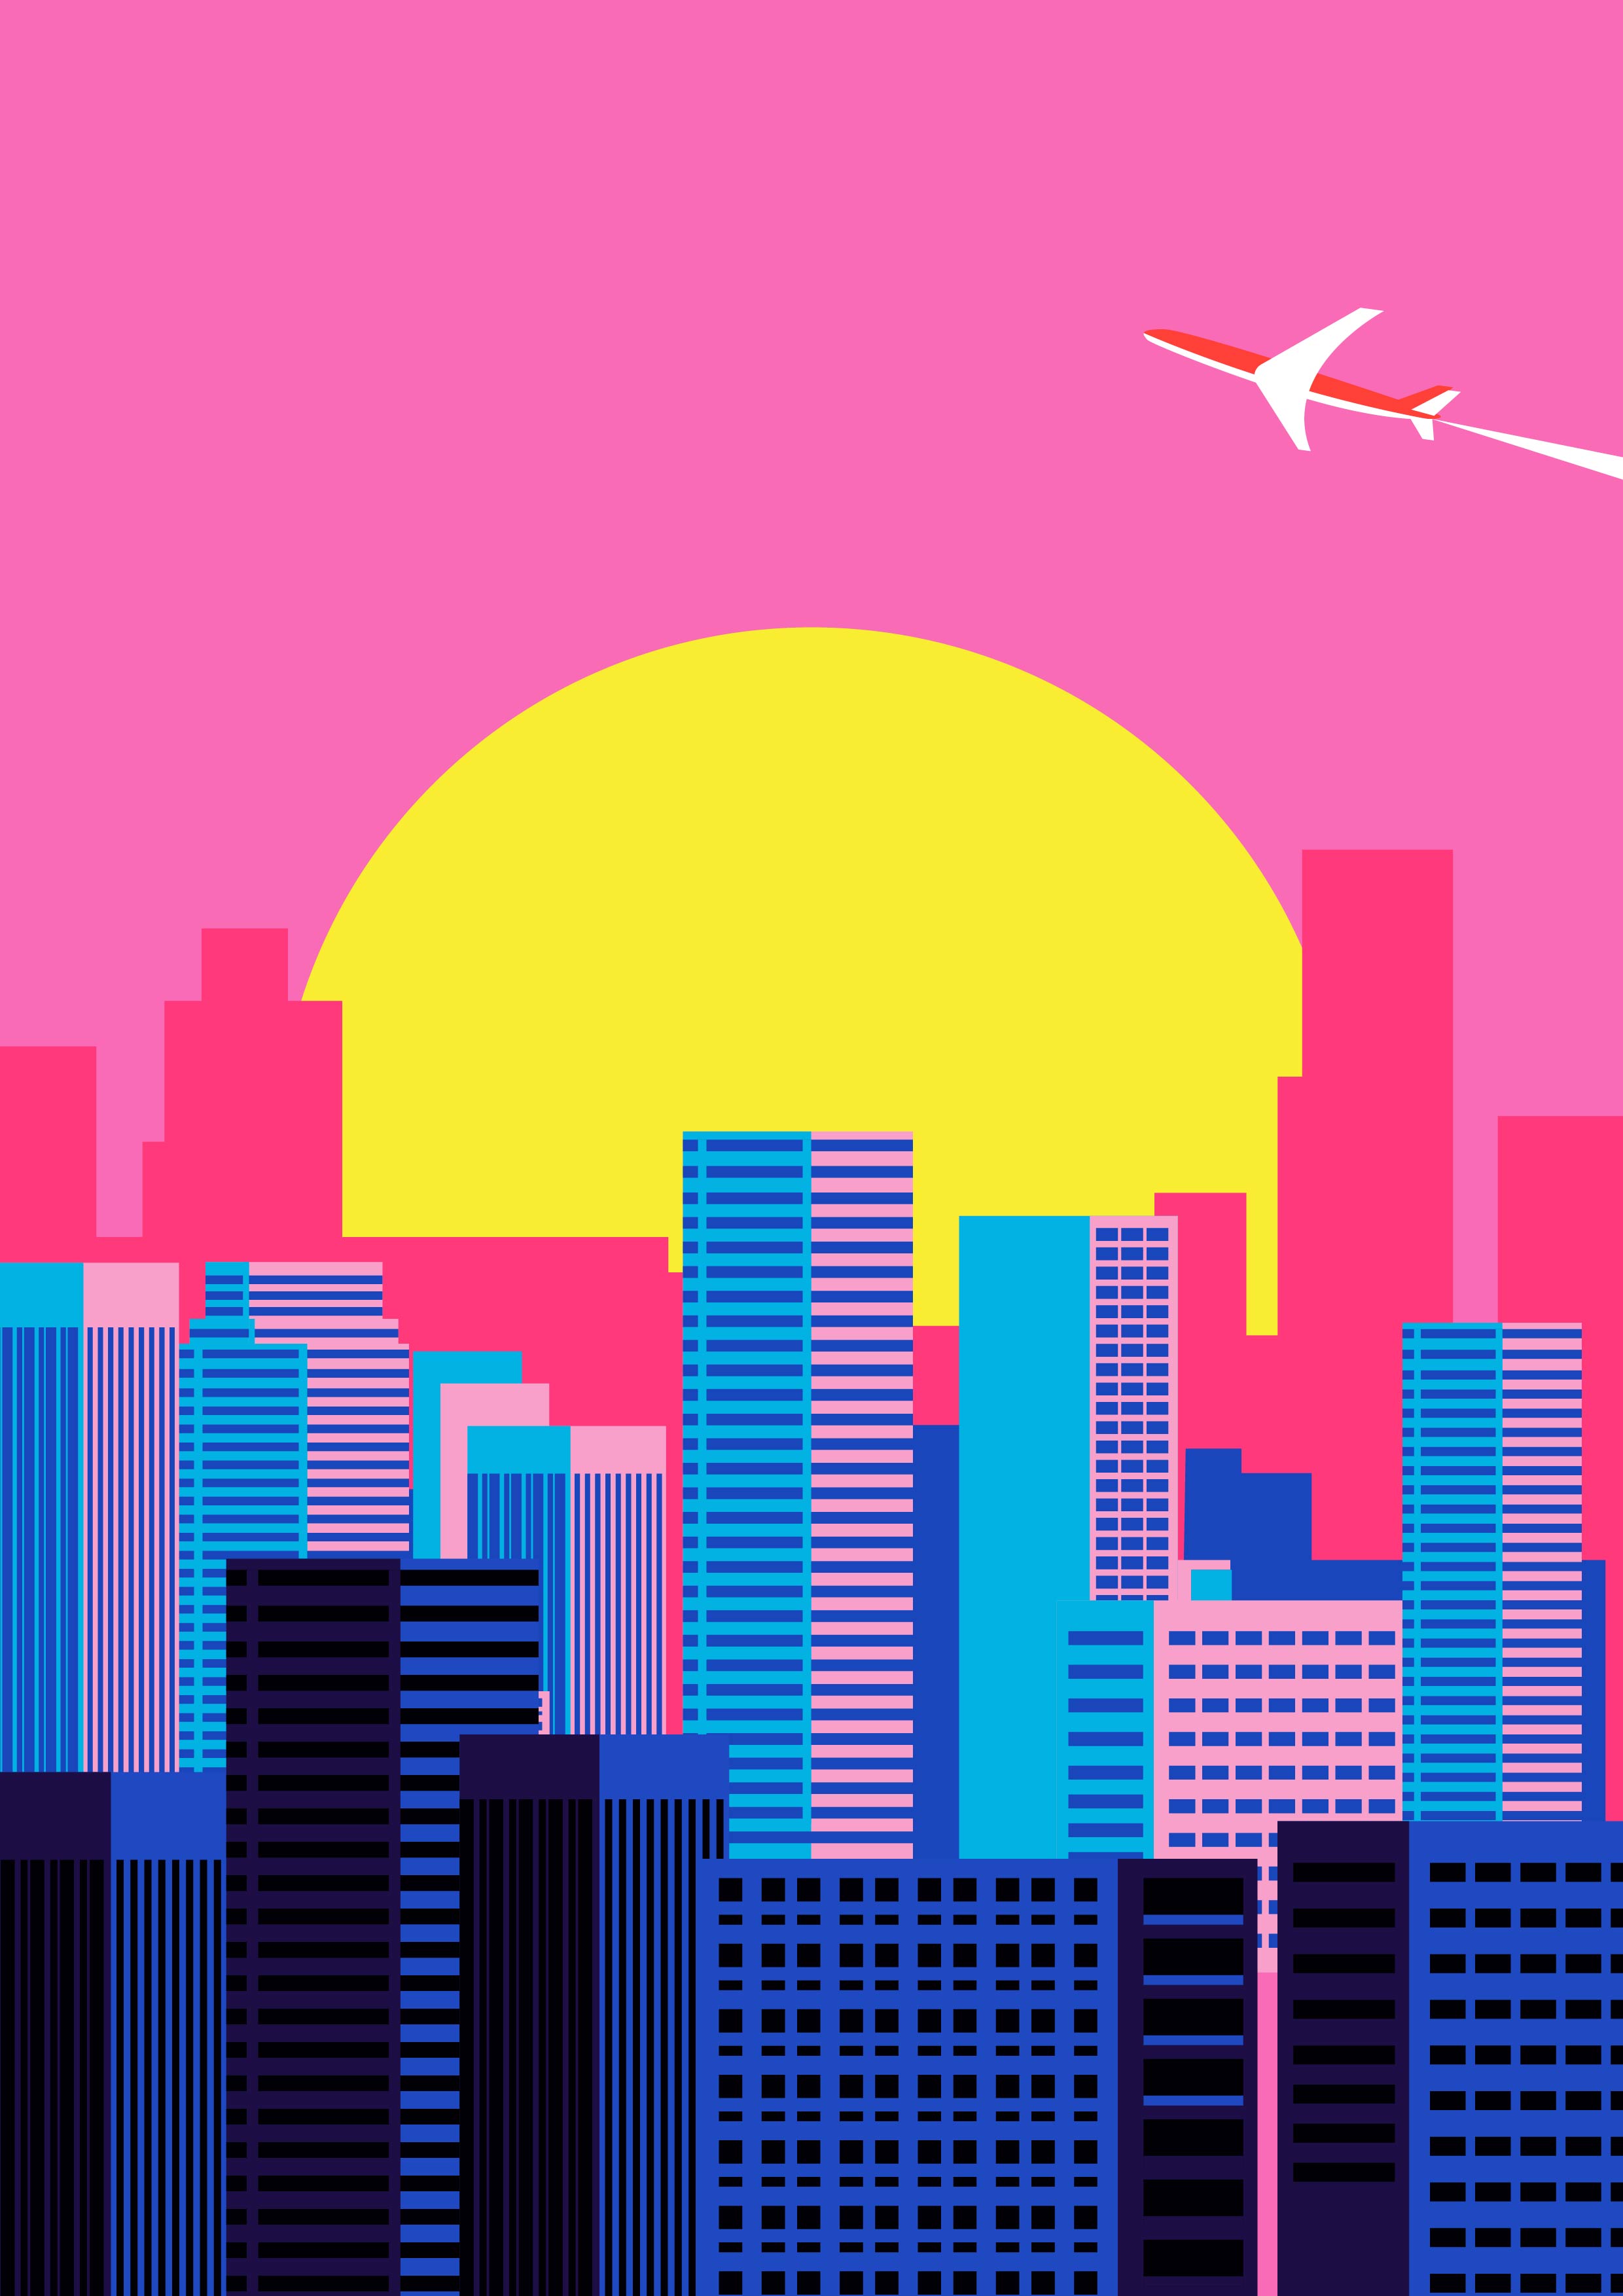  Cityscape  Sunset Background Download Free Vectors  